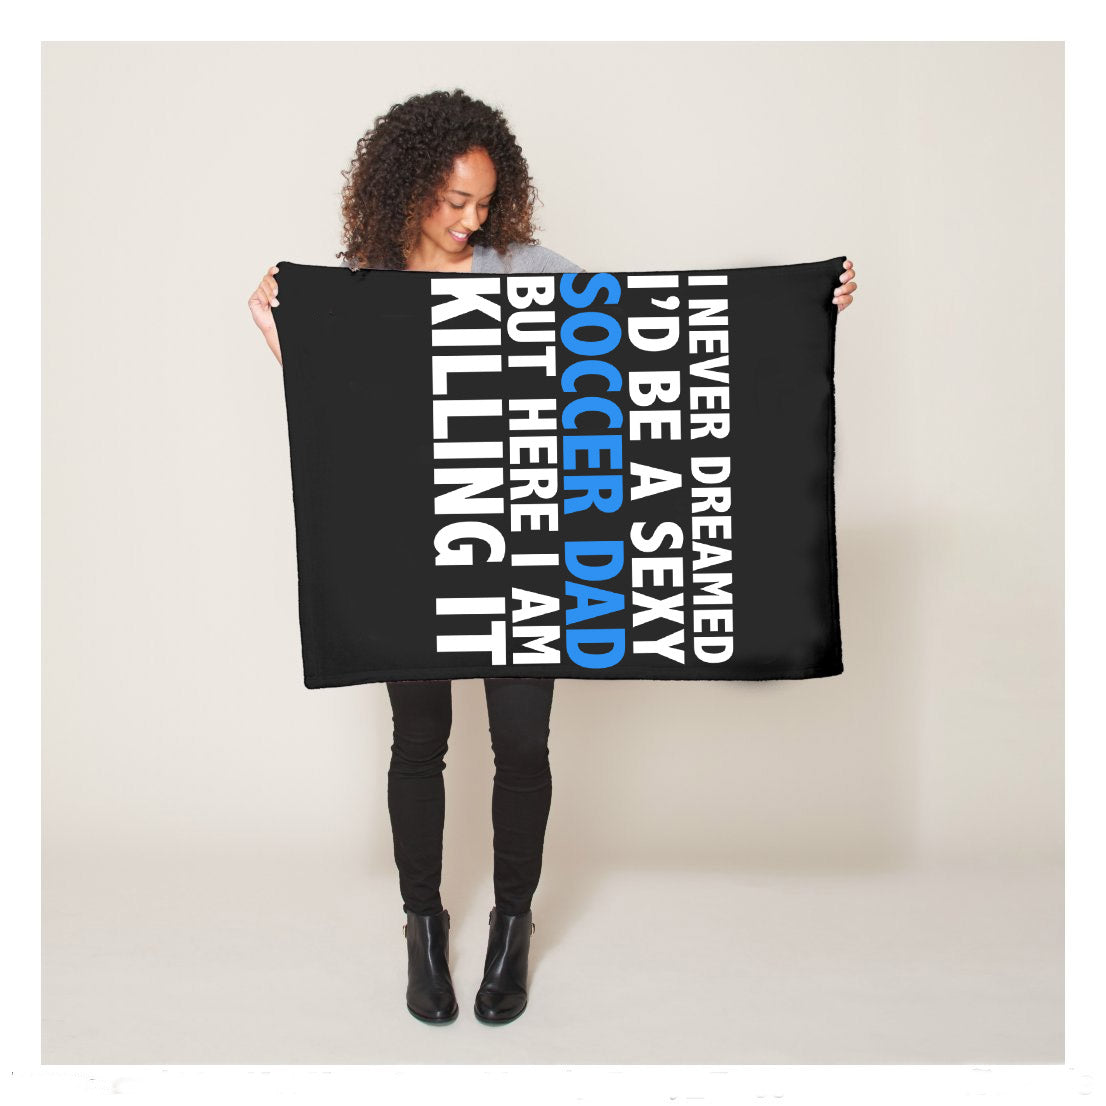 Never Dreamed Id Be A Sexy Soccer Dad Here Killin It Tee Fleece Blanket,  Soccer Blankets, Soccer Gifts, Happy Fathers Day Gift Ideas For Dad